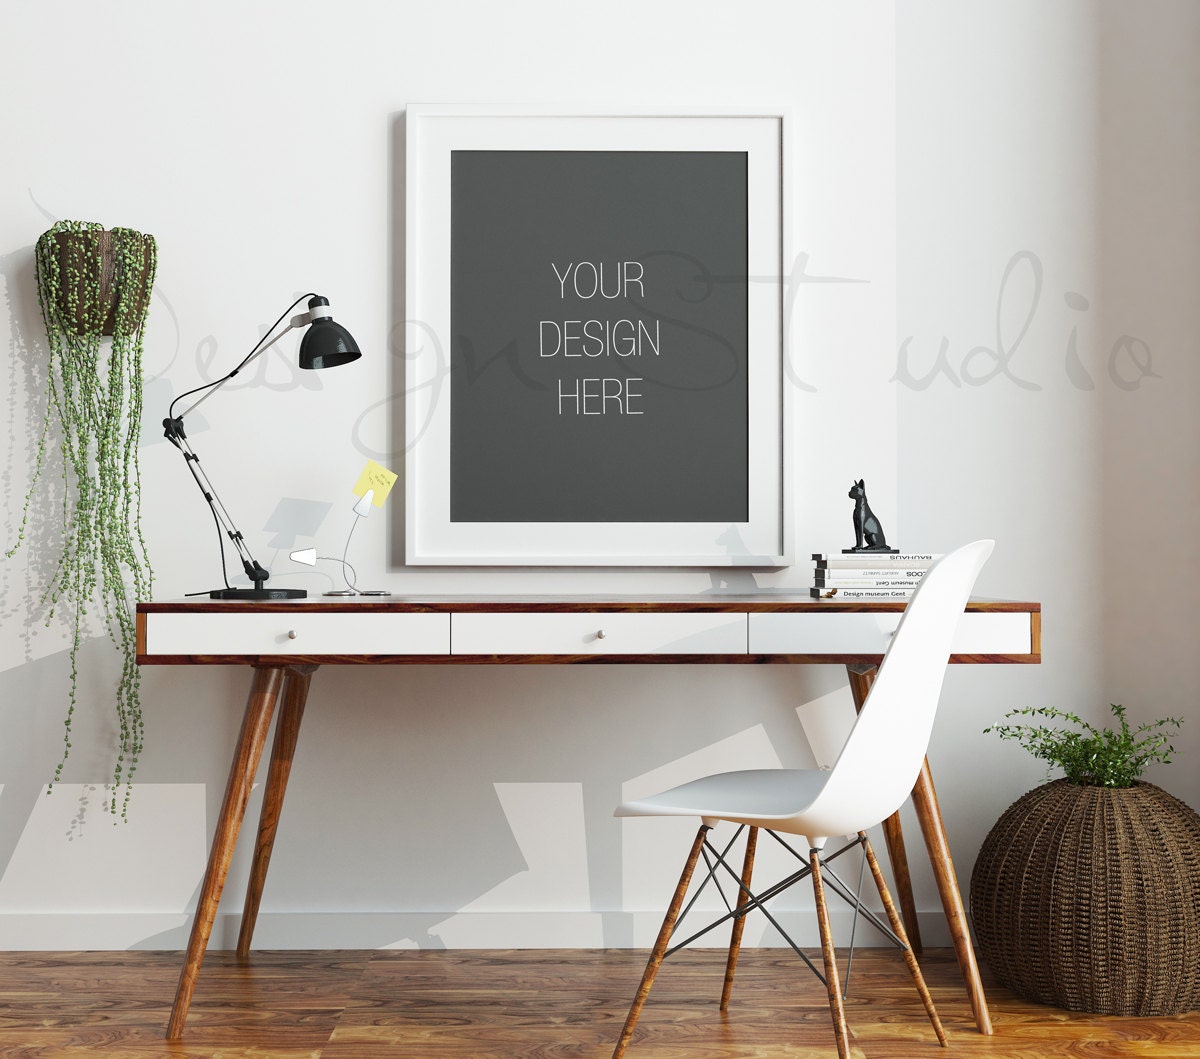 Download FRAME MOCKUP Set of 4 Styled Stock Photography 8x10 16x20